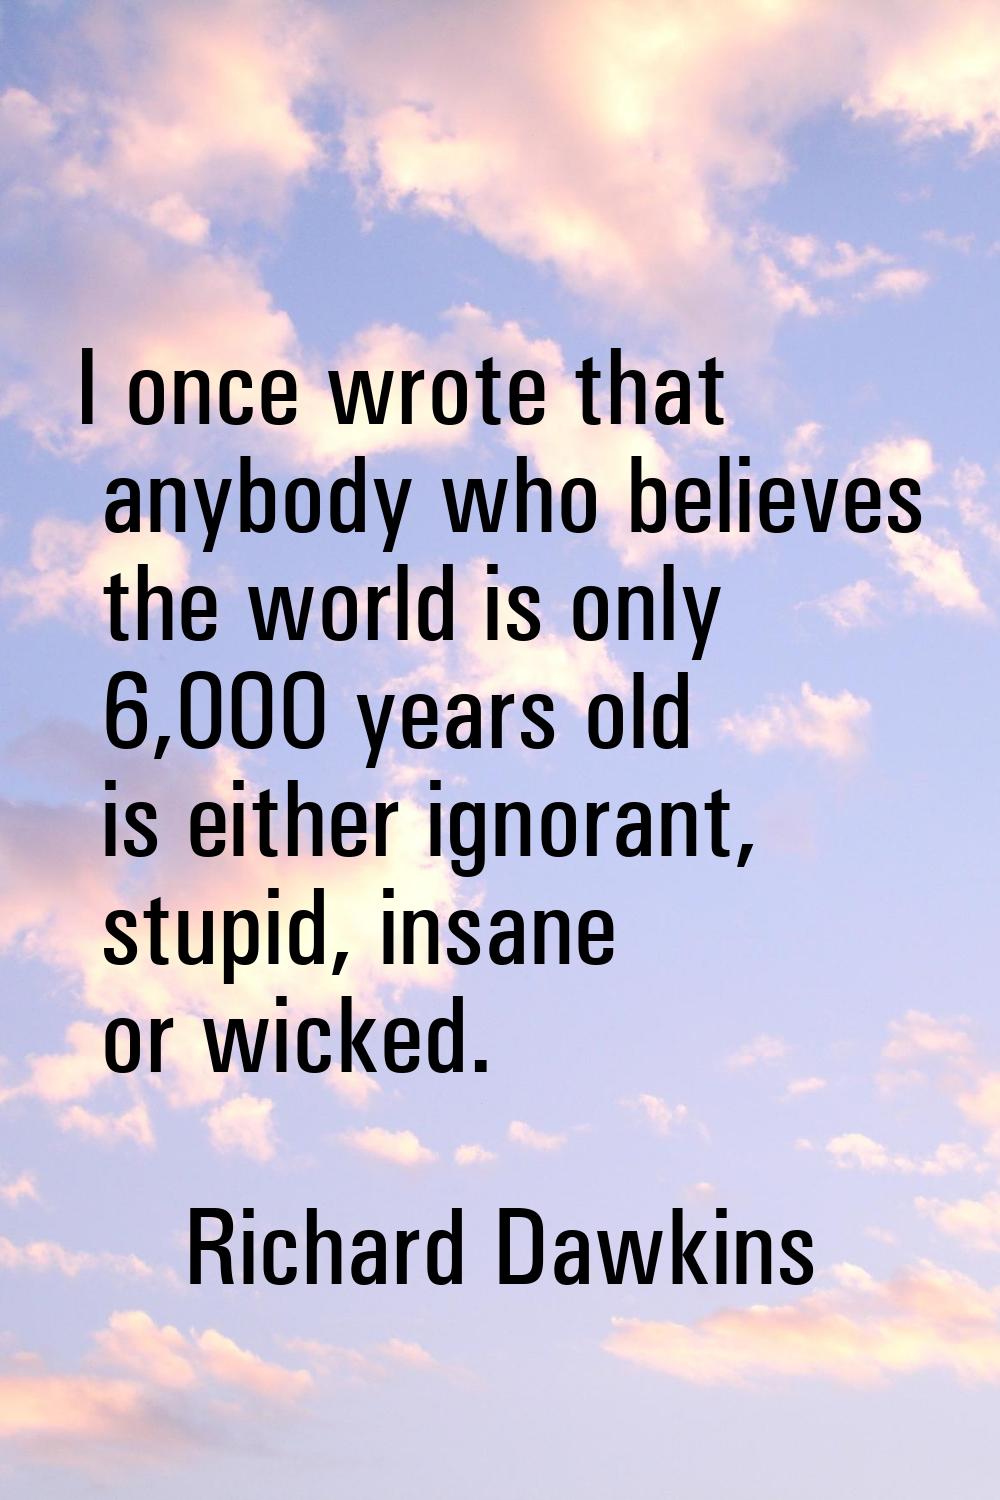 I once wrote that anybody who believes the world is only 6,000 years old is either ignorant, stupid